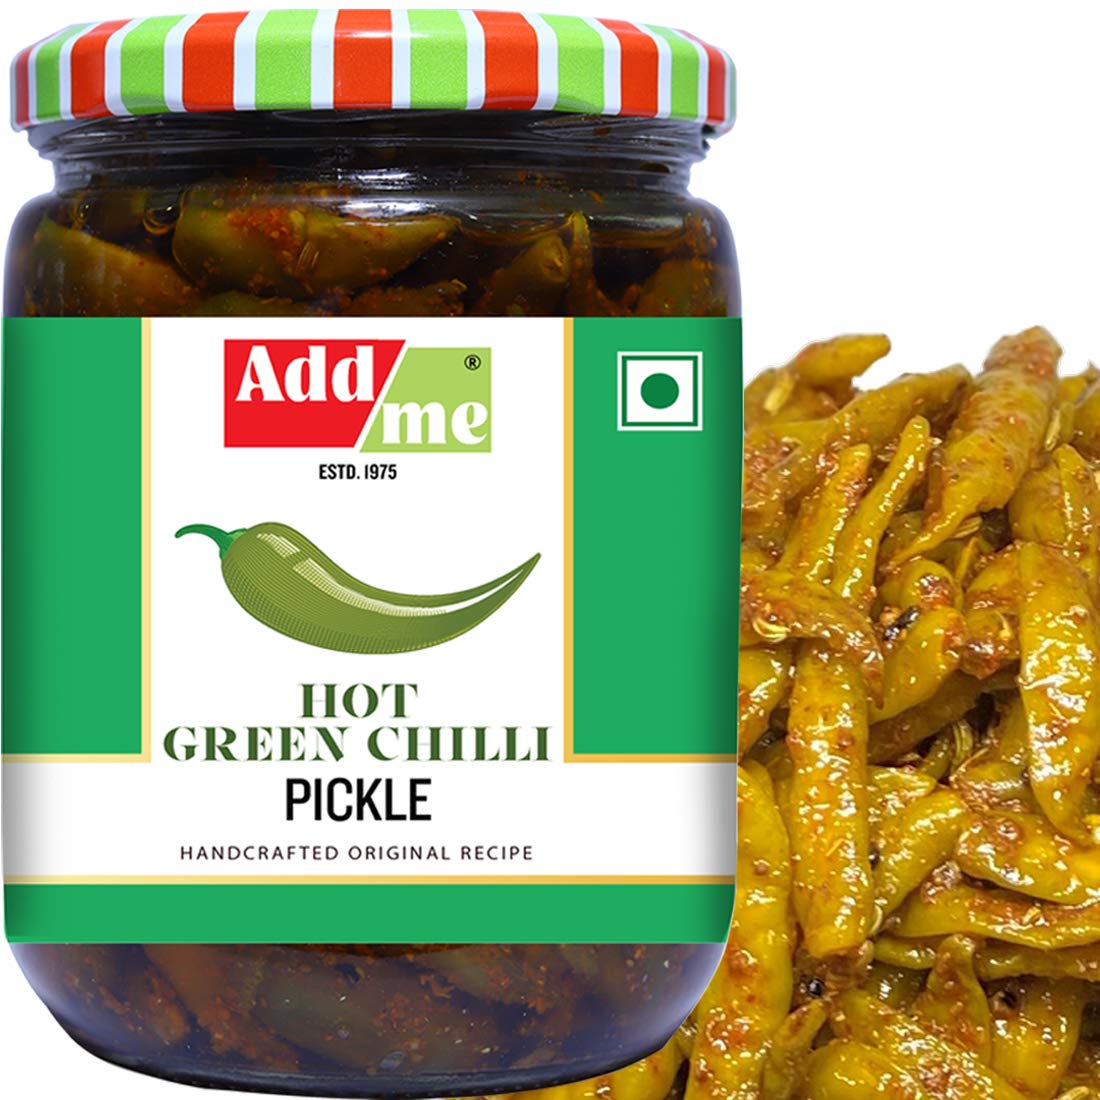 Add me Homemade Spicy Hot Green Chilli Pickle Image